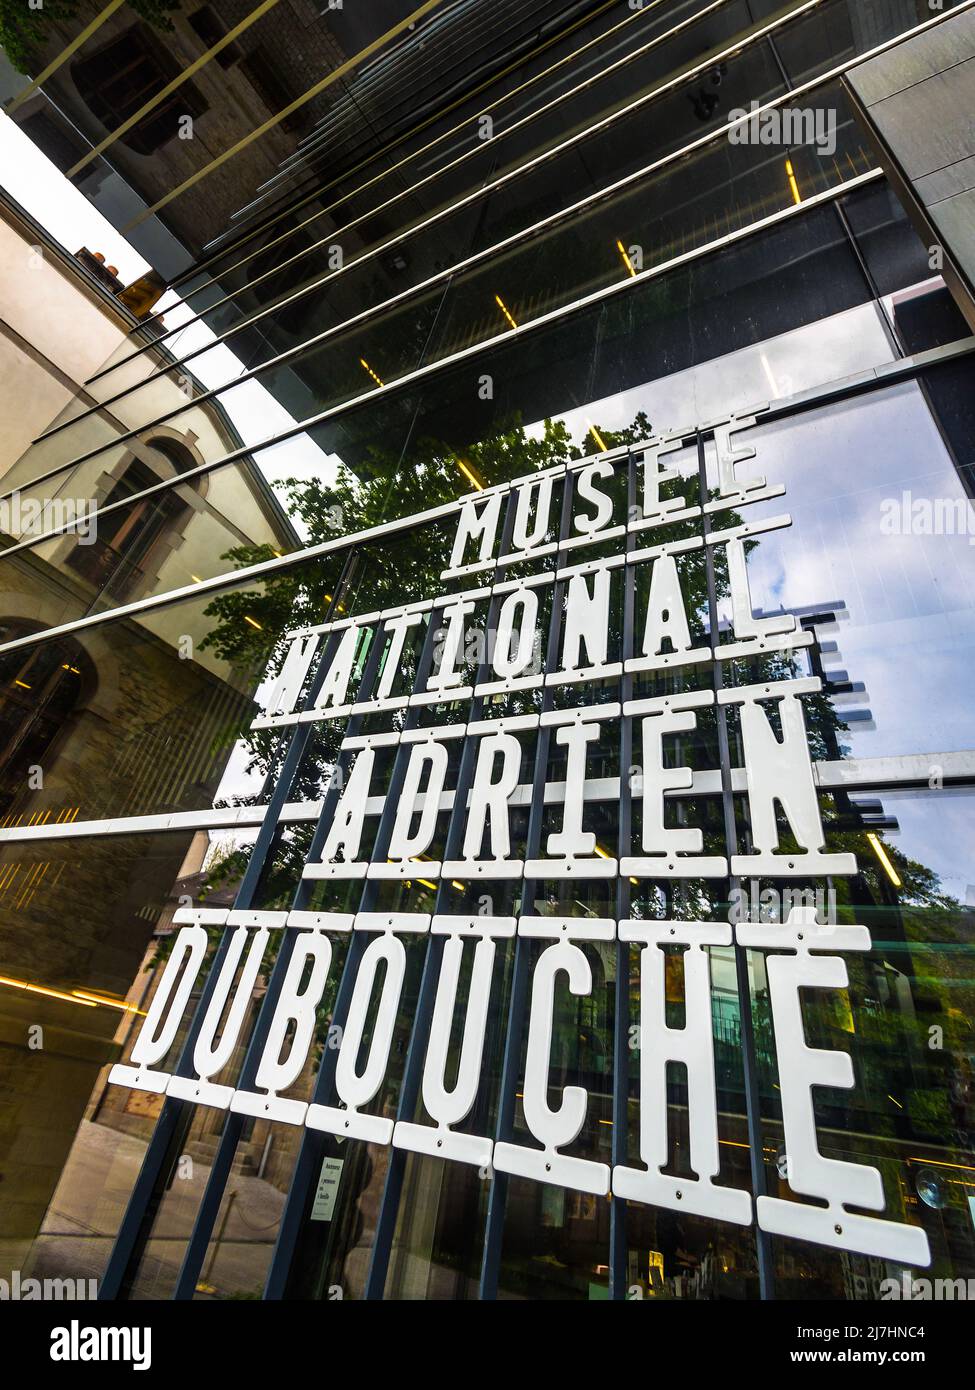 Entrance to the modern extension to the Musée National Adrien Dubouche ceramics and pottery museum in Limoges, France. Stock Photo